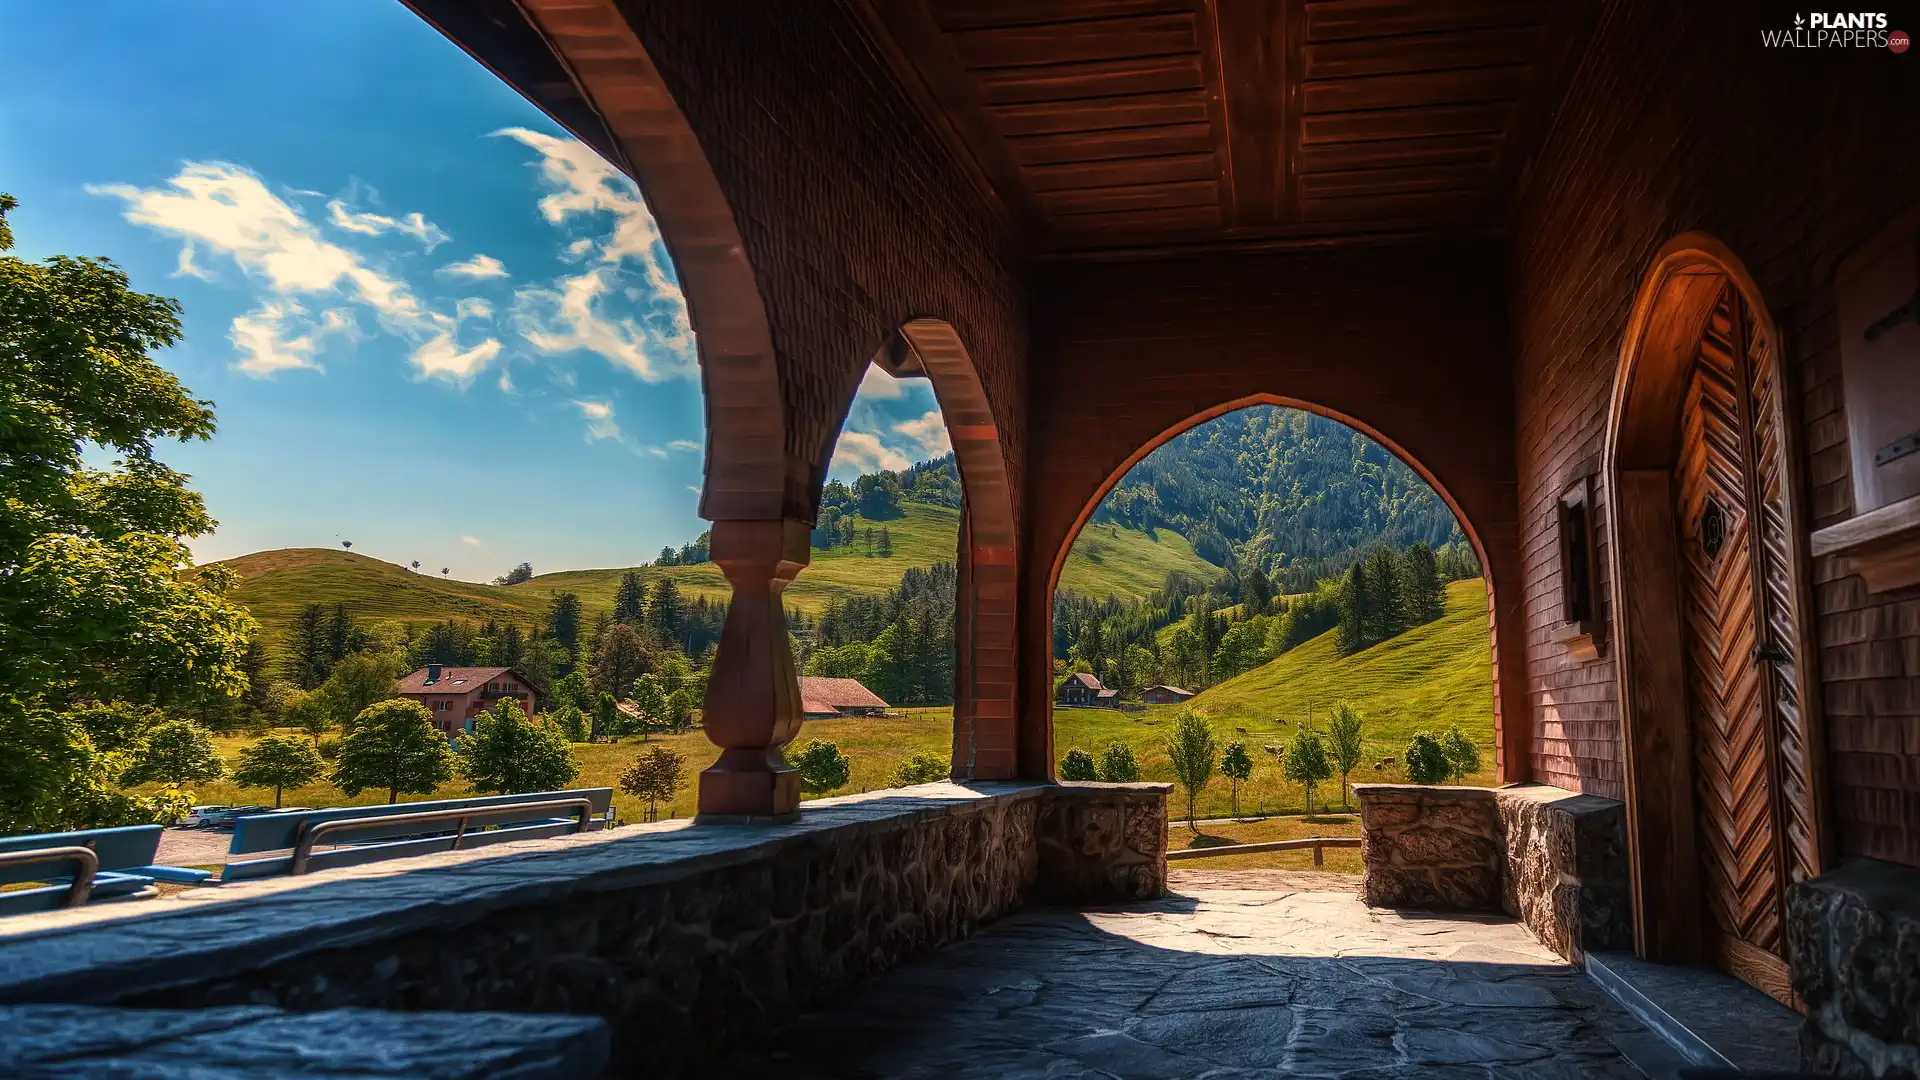 Mountains, entry, trees, Doors, house, The Hills, viewes